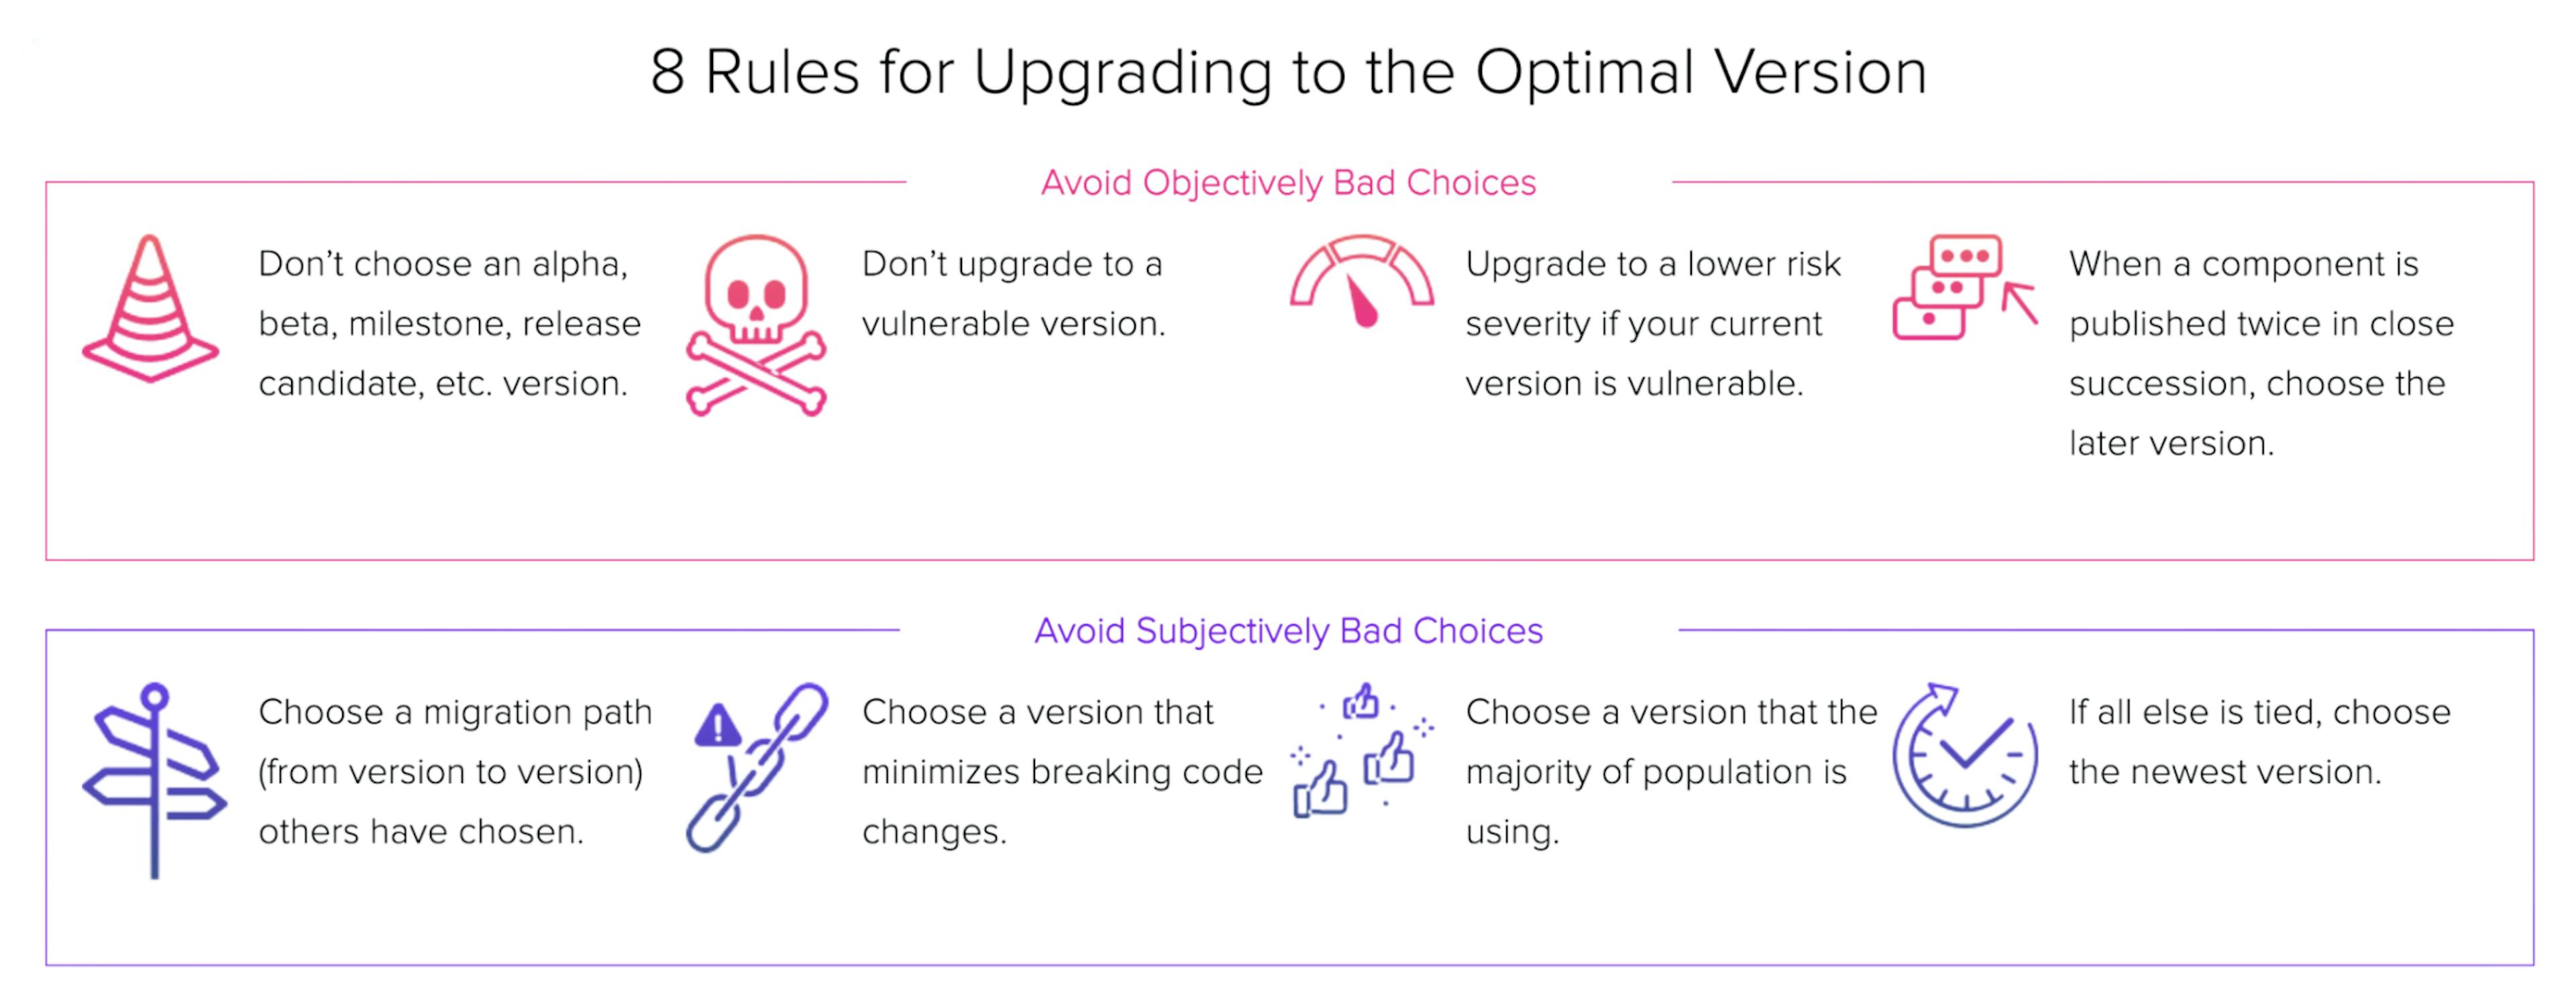 8 rules for upgrading to the optimal version, objectively vs subjectively bad choices